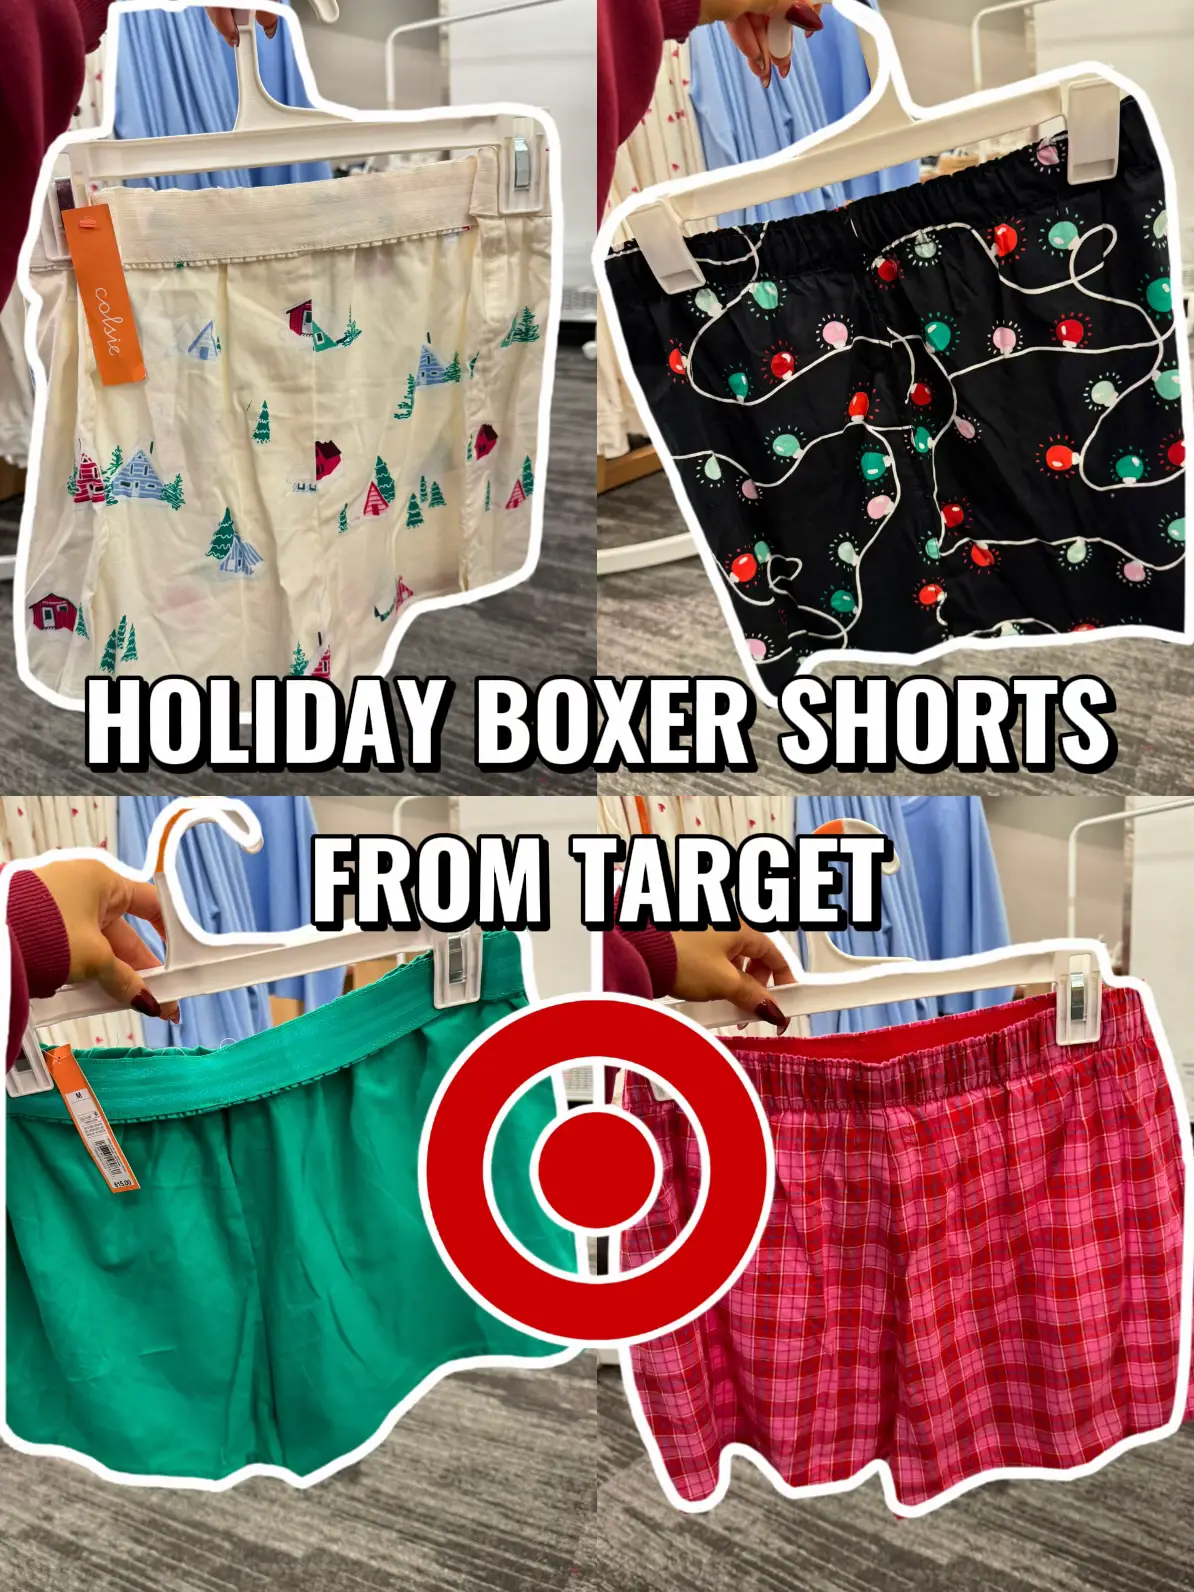 Boxer short outfits